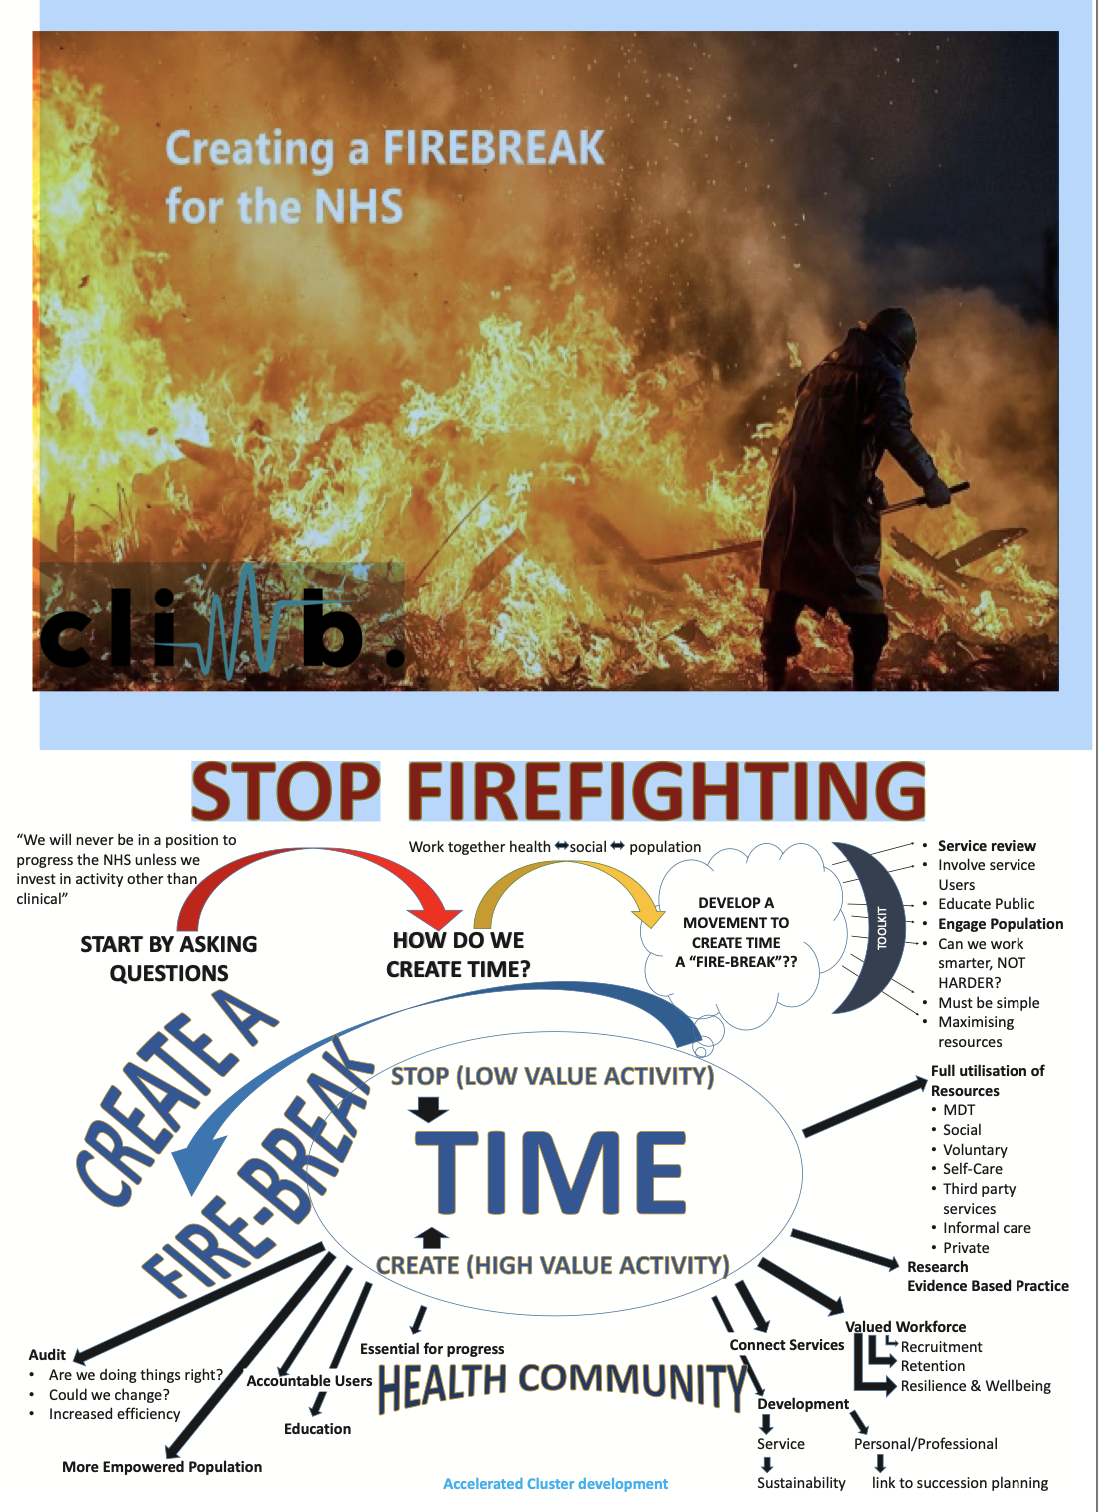 The NHS Firebreak featured image